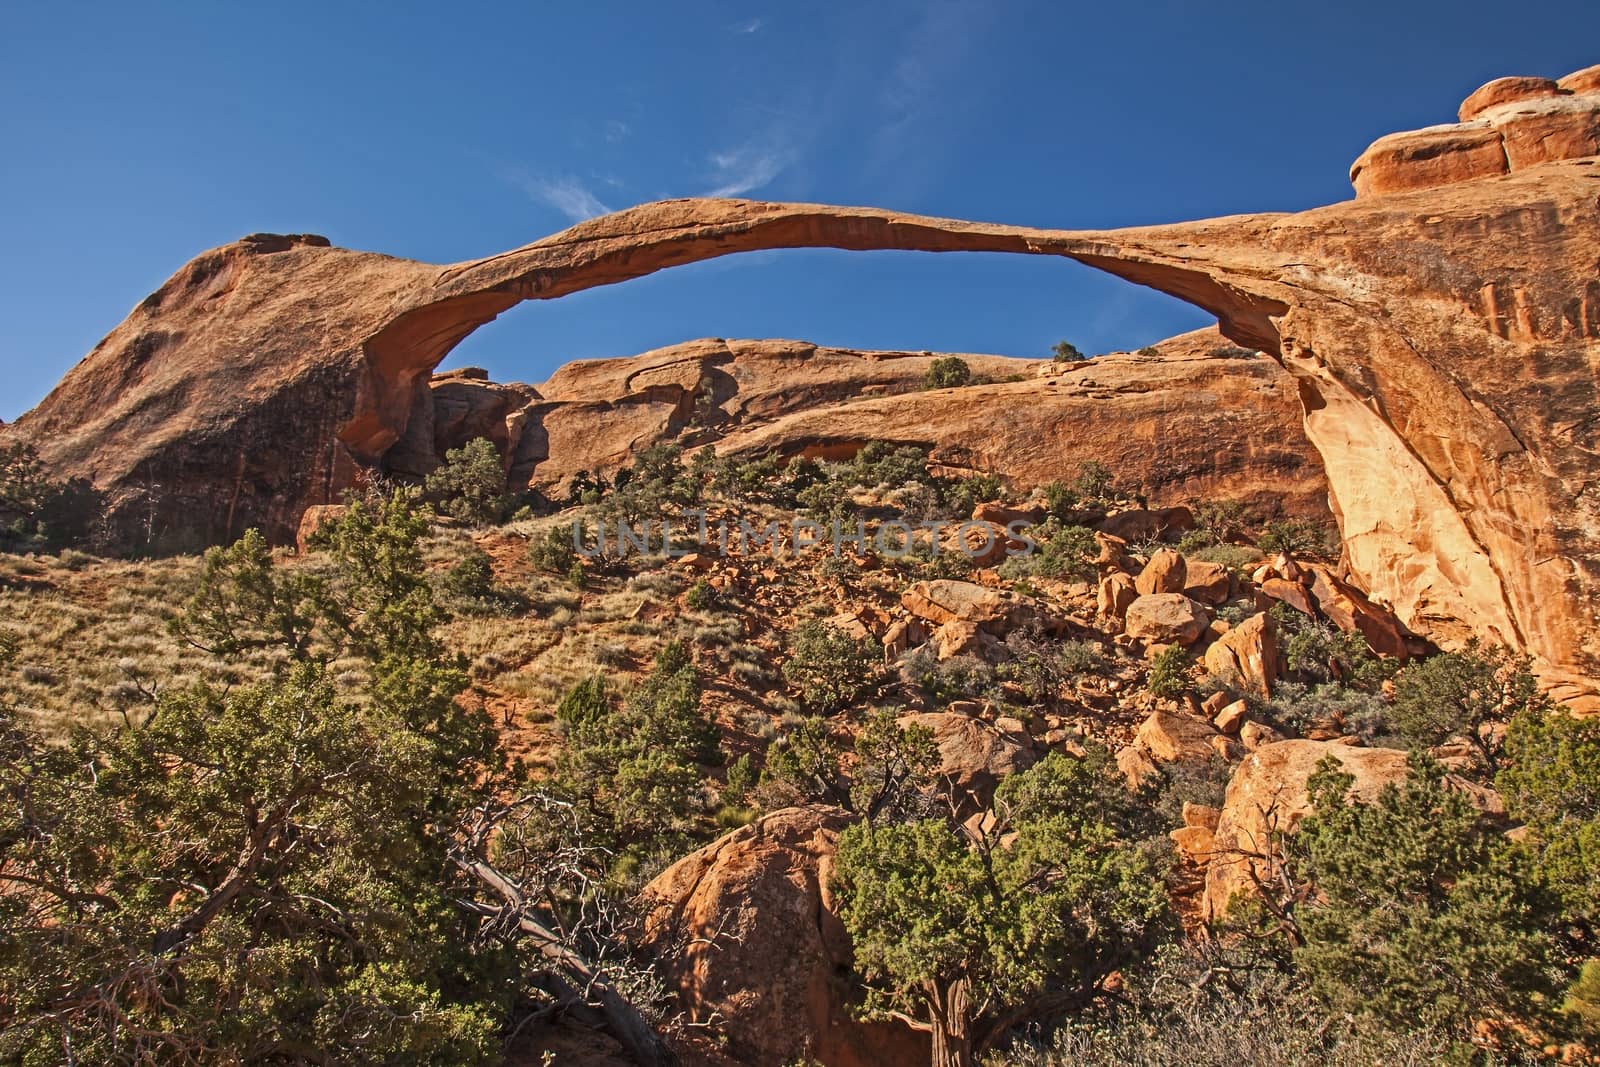 The Landscape Arch, Arches National Park Utah 3 by kobus_peche